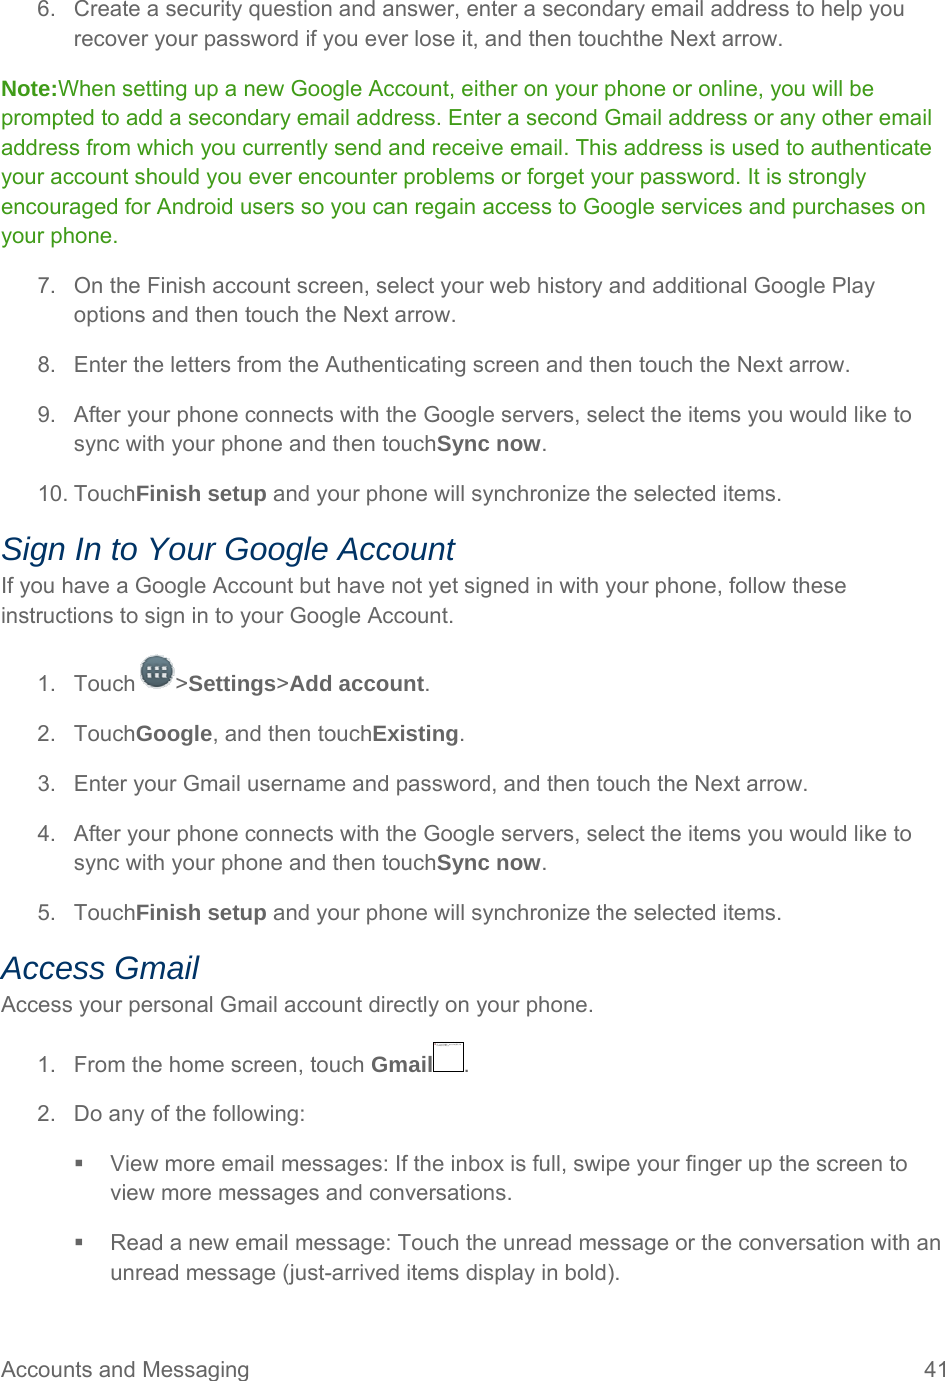 Accounts and Messaging  41 6.  Create a security question and answer, enter a secondary email address to help you recover your password if you ever lose it, and then touchthe Next arrow.  Note:When setting up a new Google Account, either on your phone or online, you will be prompted to add a secondary email address. Enter a second Gmail address or any other email address from which you currently send and receive email. This address is used to authenticate your account should you ever encounter problems or forget your password. It is strongly encouraged for Android users so you can regain access to Google services and purchases on your phone. 7.  On the Finish account screen, select your web history and additional Google Play options and then touch the Next arrow. 8.  Enter the letters from the Authenticating screen and then touch the Next arrow. 9.  After your phone connects with the Google servers, select the items you would like to sync with your phone and then touchSync now.  10. TouchFinish setup and your phone will synchronize the selected items. Sign In to Your Google Account If you have a Google Account but have not yet signed in with your phone, follow these instructions to sign in to your Google Account. 1. Touch &gt;Settings&gt;Add account. 2. TouchGoogle, and then touchExisting.  3.  Enter your Gmail username and password, and then touch the Next arrow. 4.  After your phone connects with the Google servers, select the items you would like to sync with your phone and then touchSync now.  5. TouchFinish setup and your phone will synchronize the selected items. Access Gmail Access your personal Gmail account directly on your phone. 1.  From the home screen, touch Gmail . 2.  Do any of the following:   View more email messages: If the inbox is full, swipe your finger up the screen to view more messages and conversations.   Read a new email message: Touch the unread message or the conversation with an unread message (just-arrived items display in bold).  无法显示链接的图像。该文件可能已被移动、重命名或删除。请验证该链接是否指向正确的文件和位置。